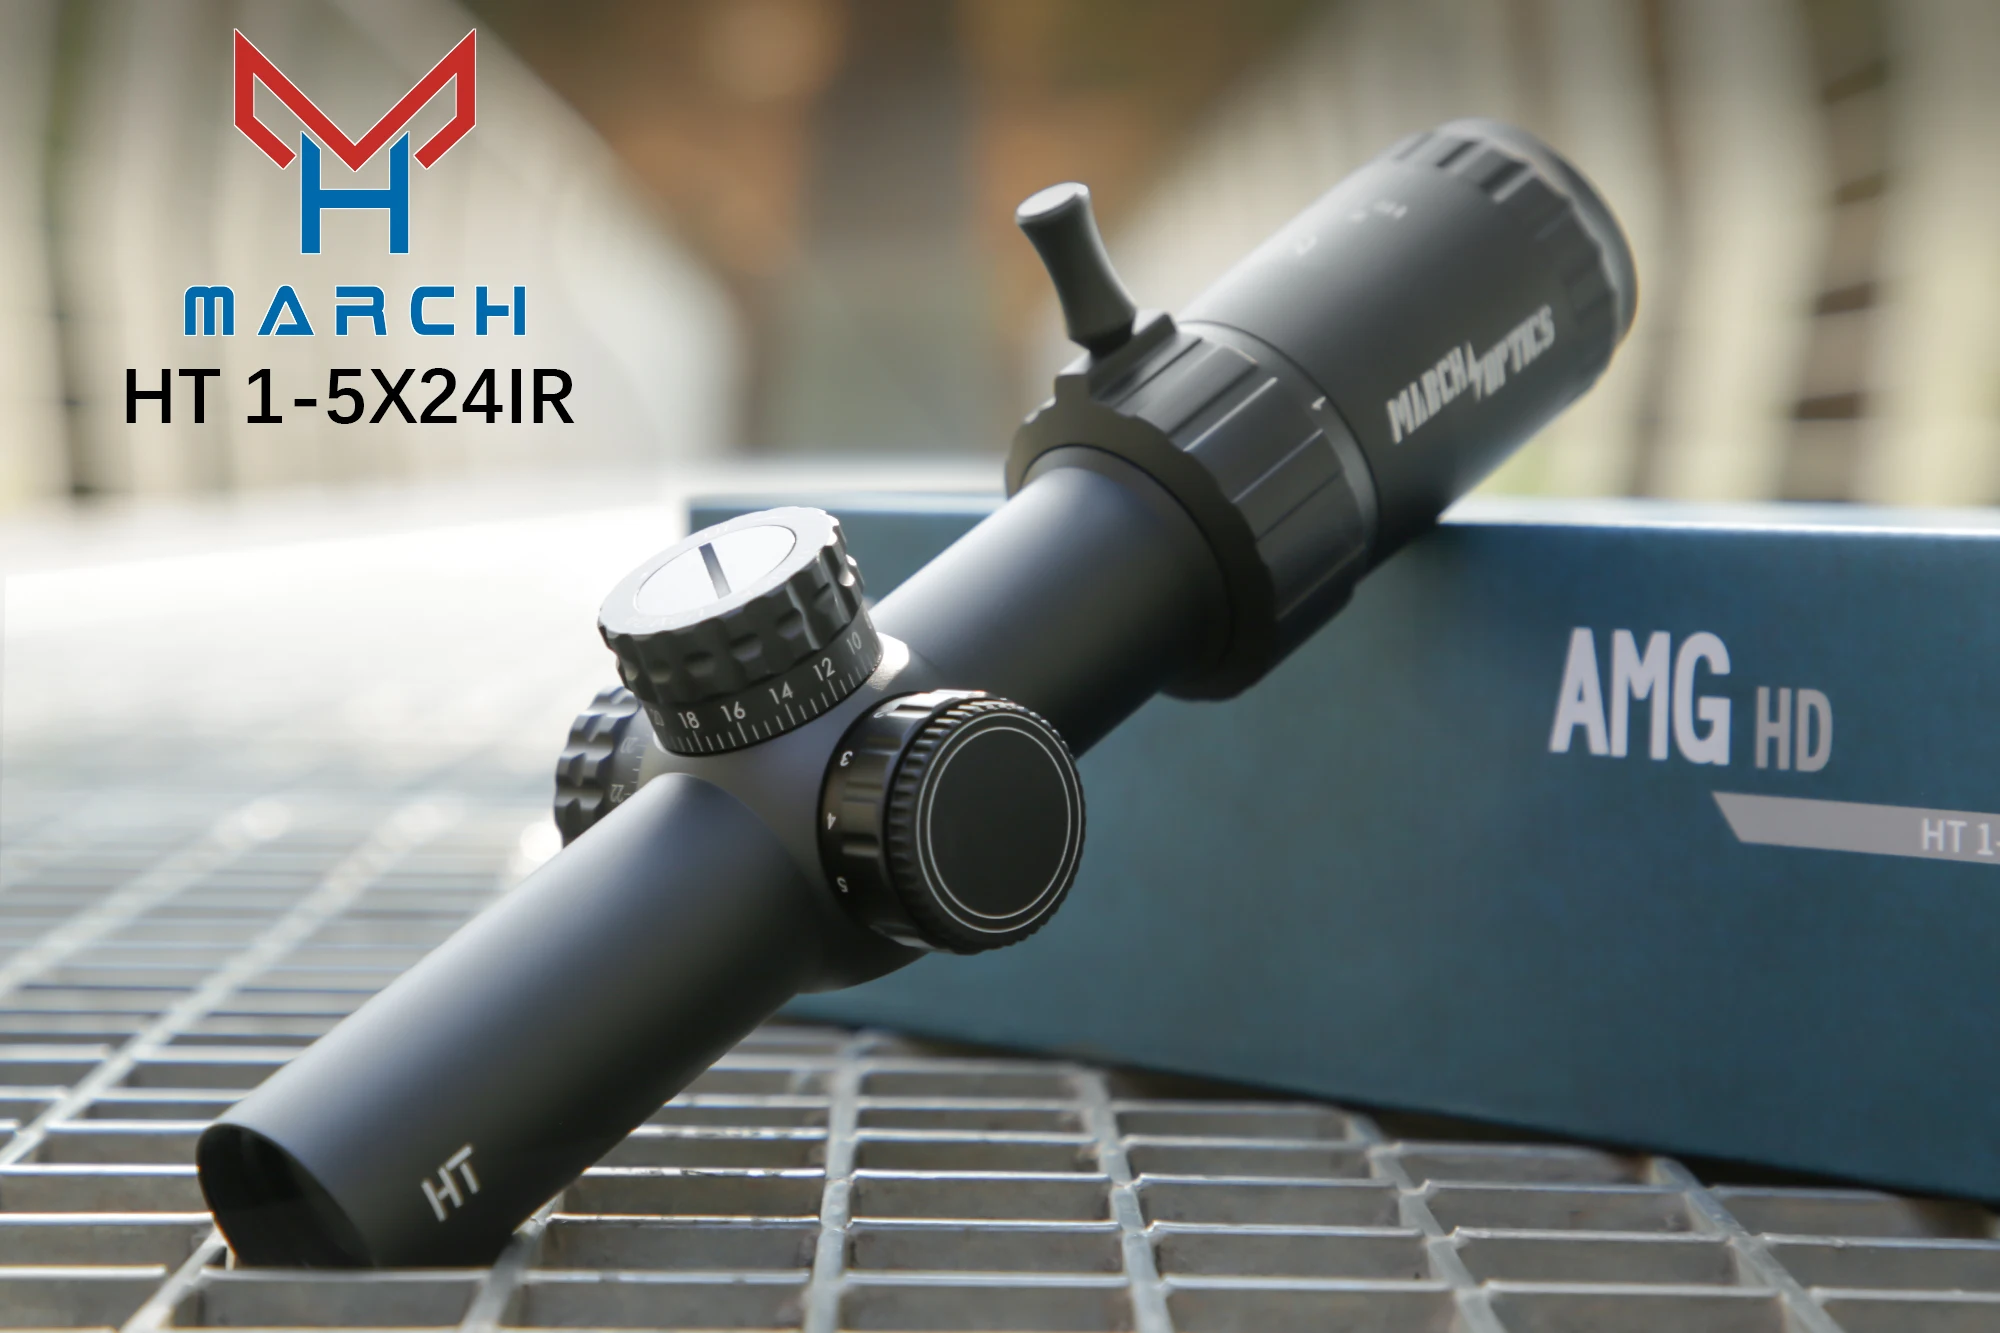 MARCH HT1-5X24 IR Tactical Rifle Scope Wide Angle Airsoft Riflescope Hunting Shooting PCP Optics Sight HK Reticle Equipment